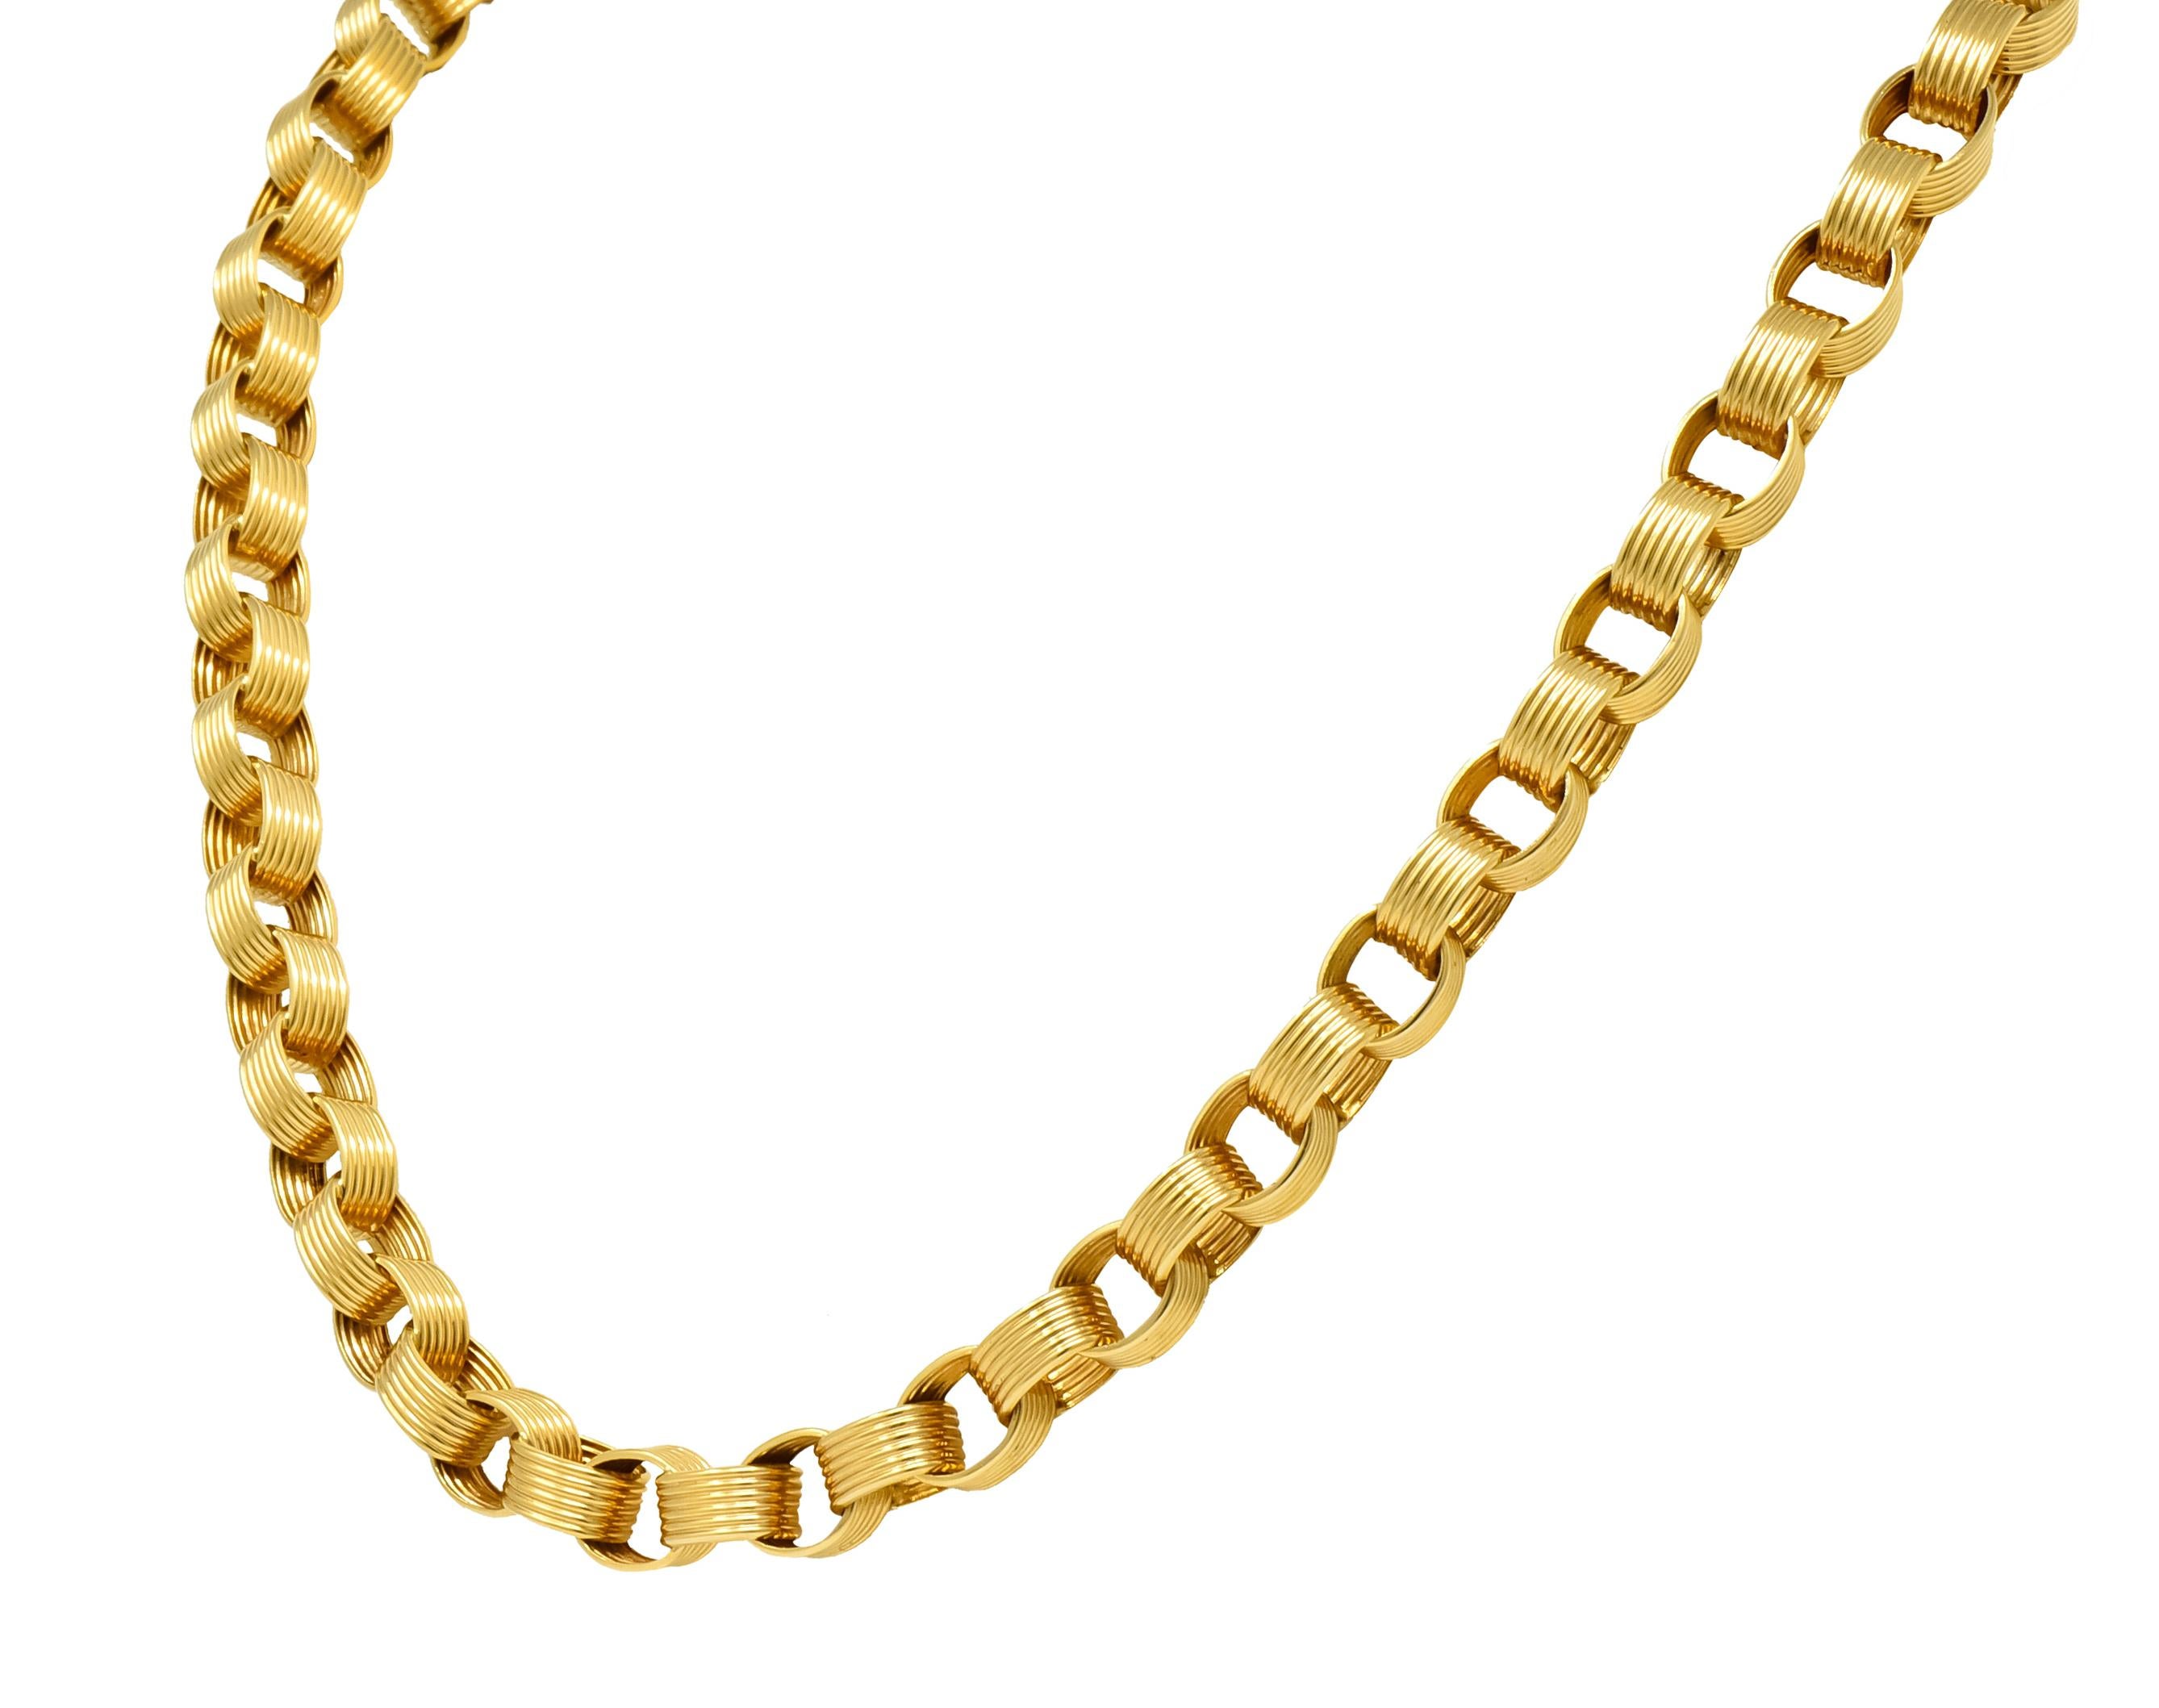 Rolo style chain comprised of large, deeply ridged links

With a bright polished finish

Completed by lobster clasp

Stamped 18ct for 18 karat gold

Length: 26 inches

Width: 3/8 inch

Total weight: 88.9 grams

Fearless. Golden. Significant.

